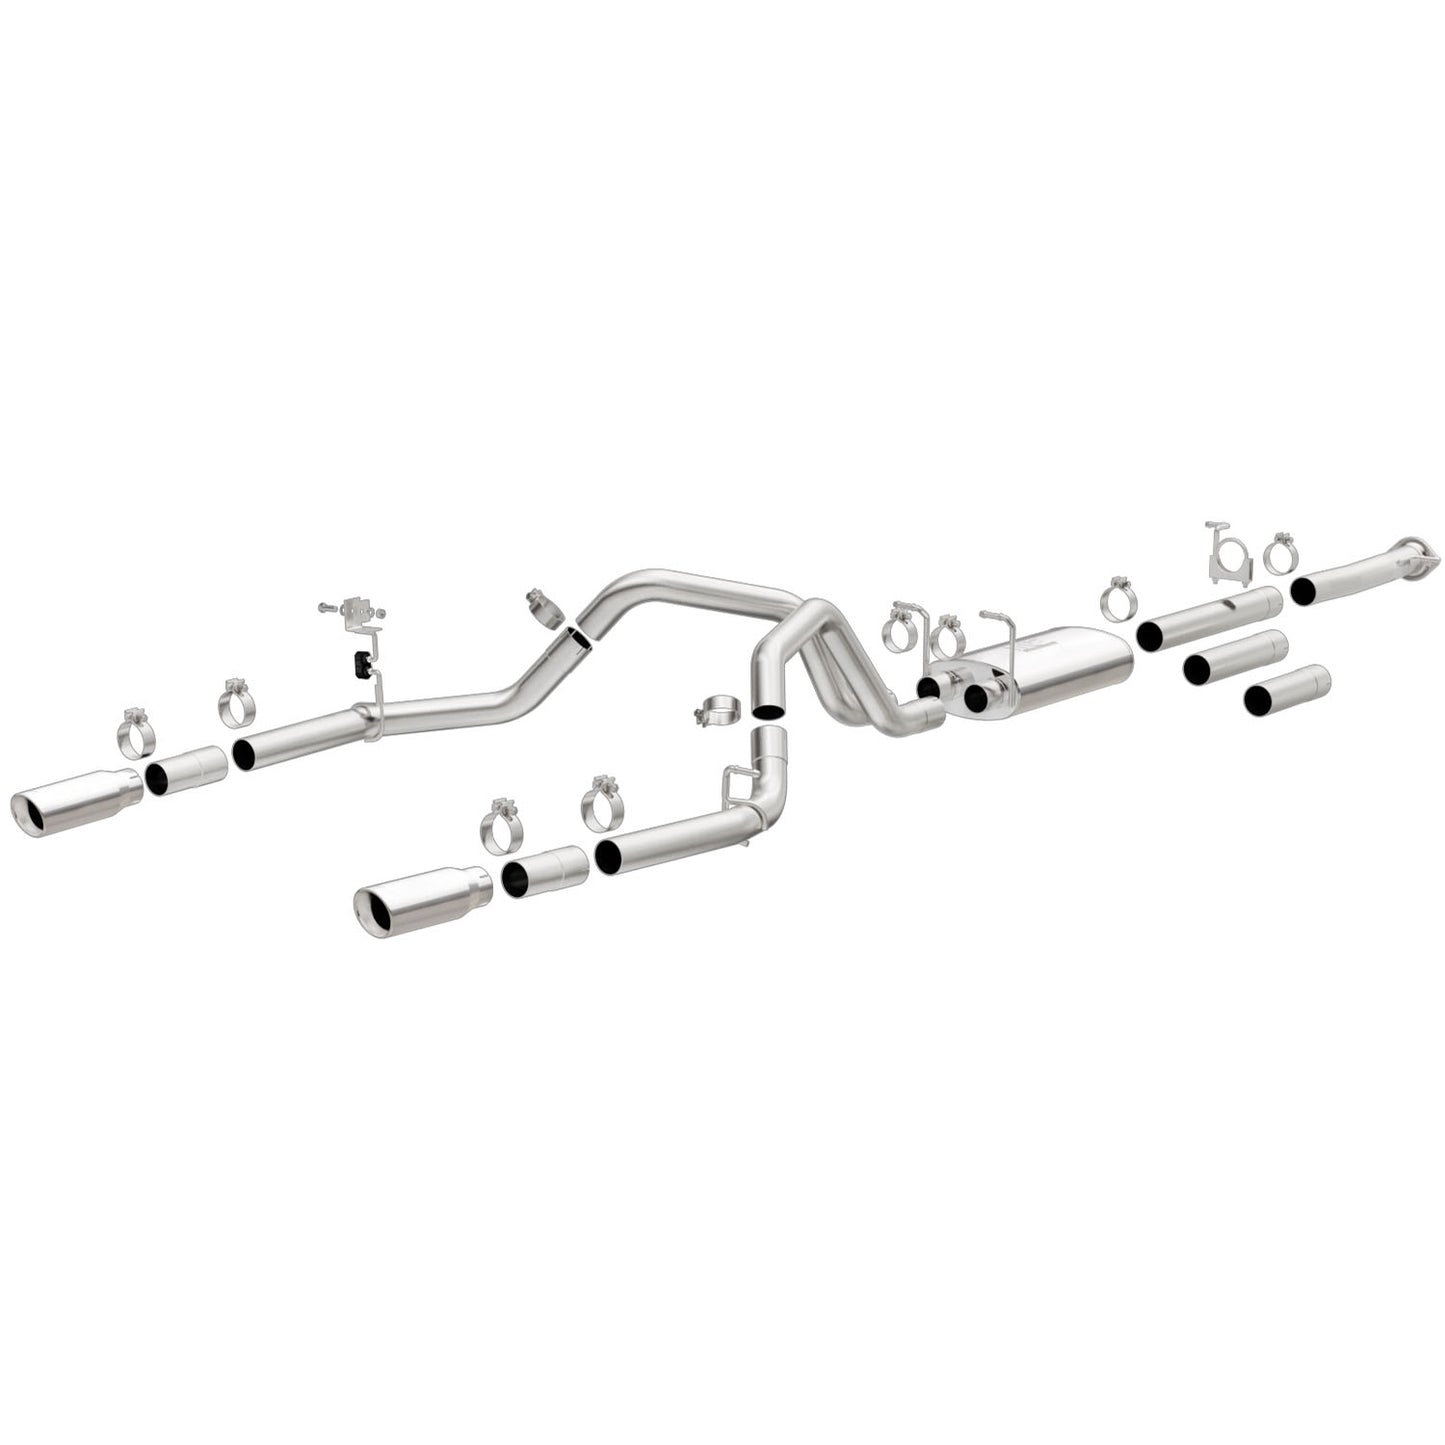 MagnaFlow Street Series Cat-Back Performance Exhaust System 19027